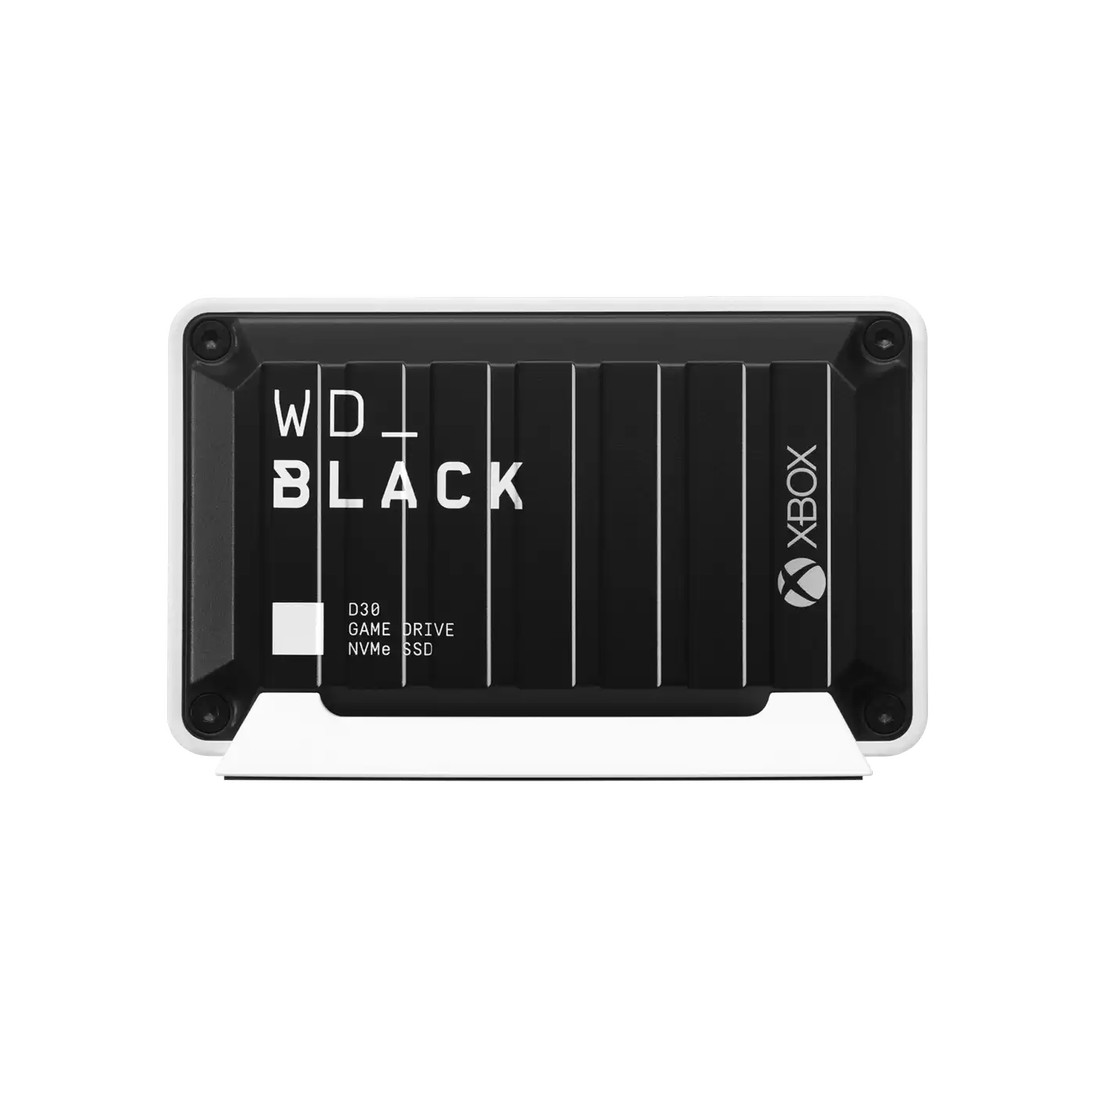 WD Black D30 Game Drive 2TB External SSD for Xbox